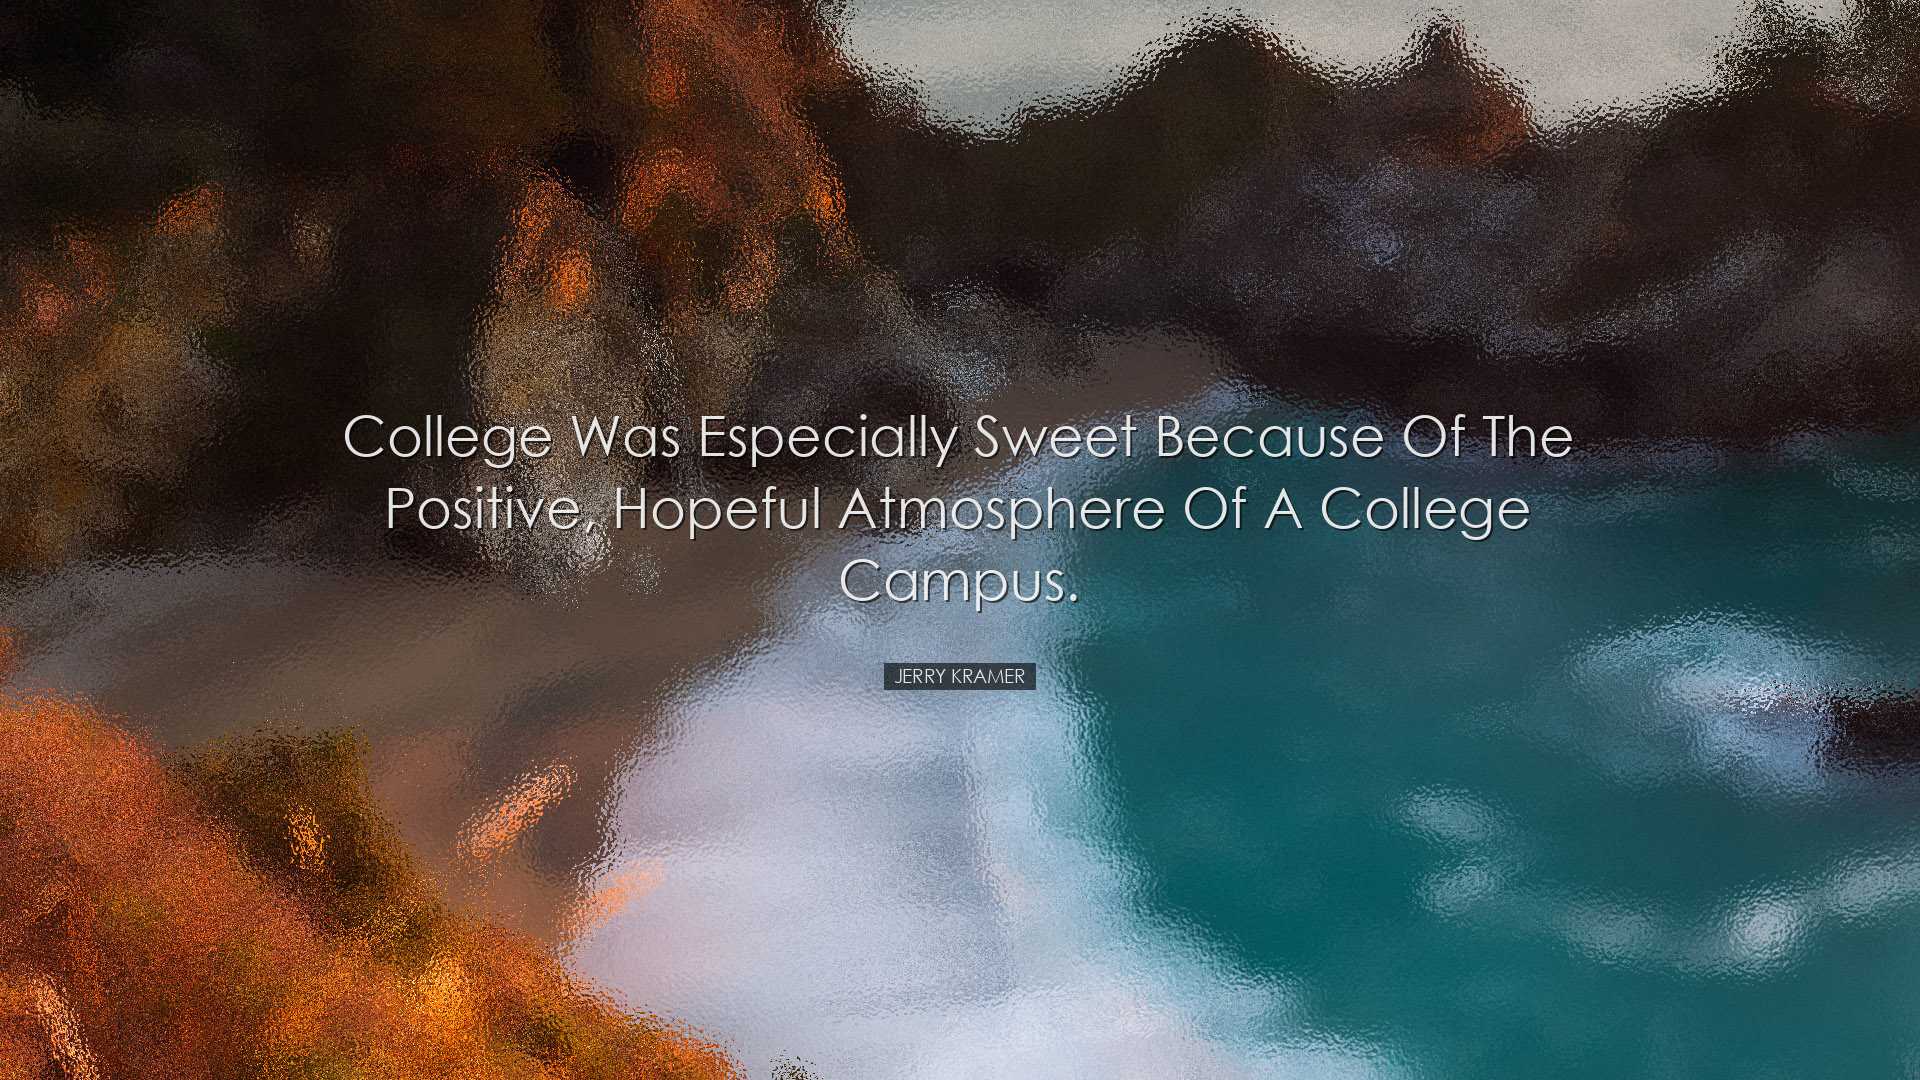 College was especially sweet because of the positive, hopeful atmo